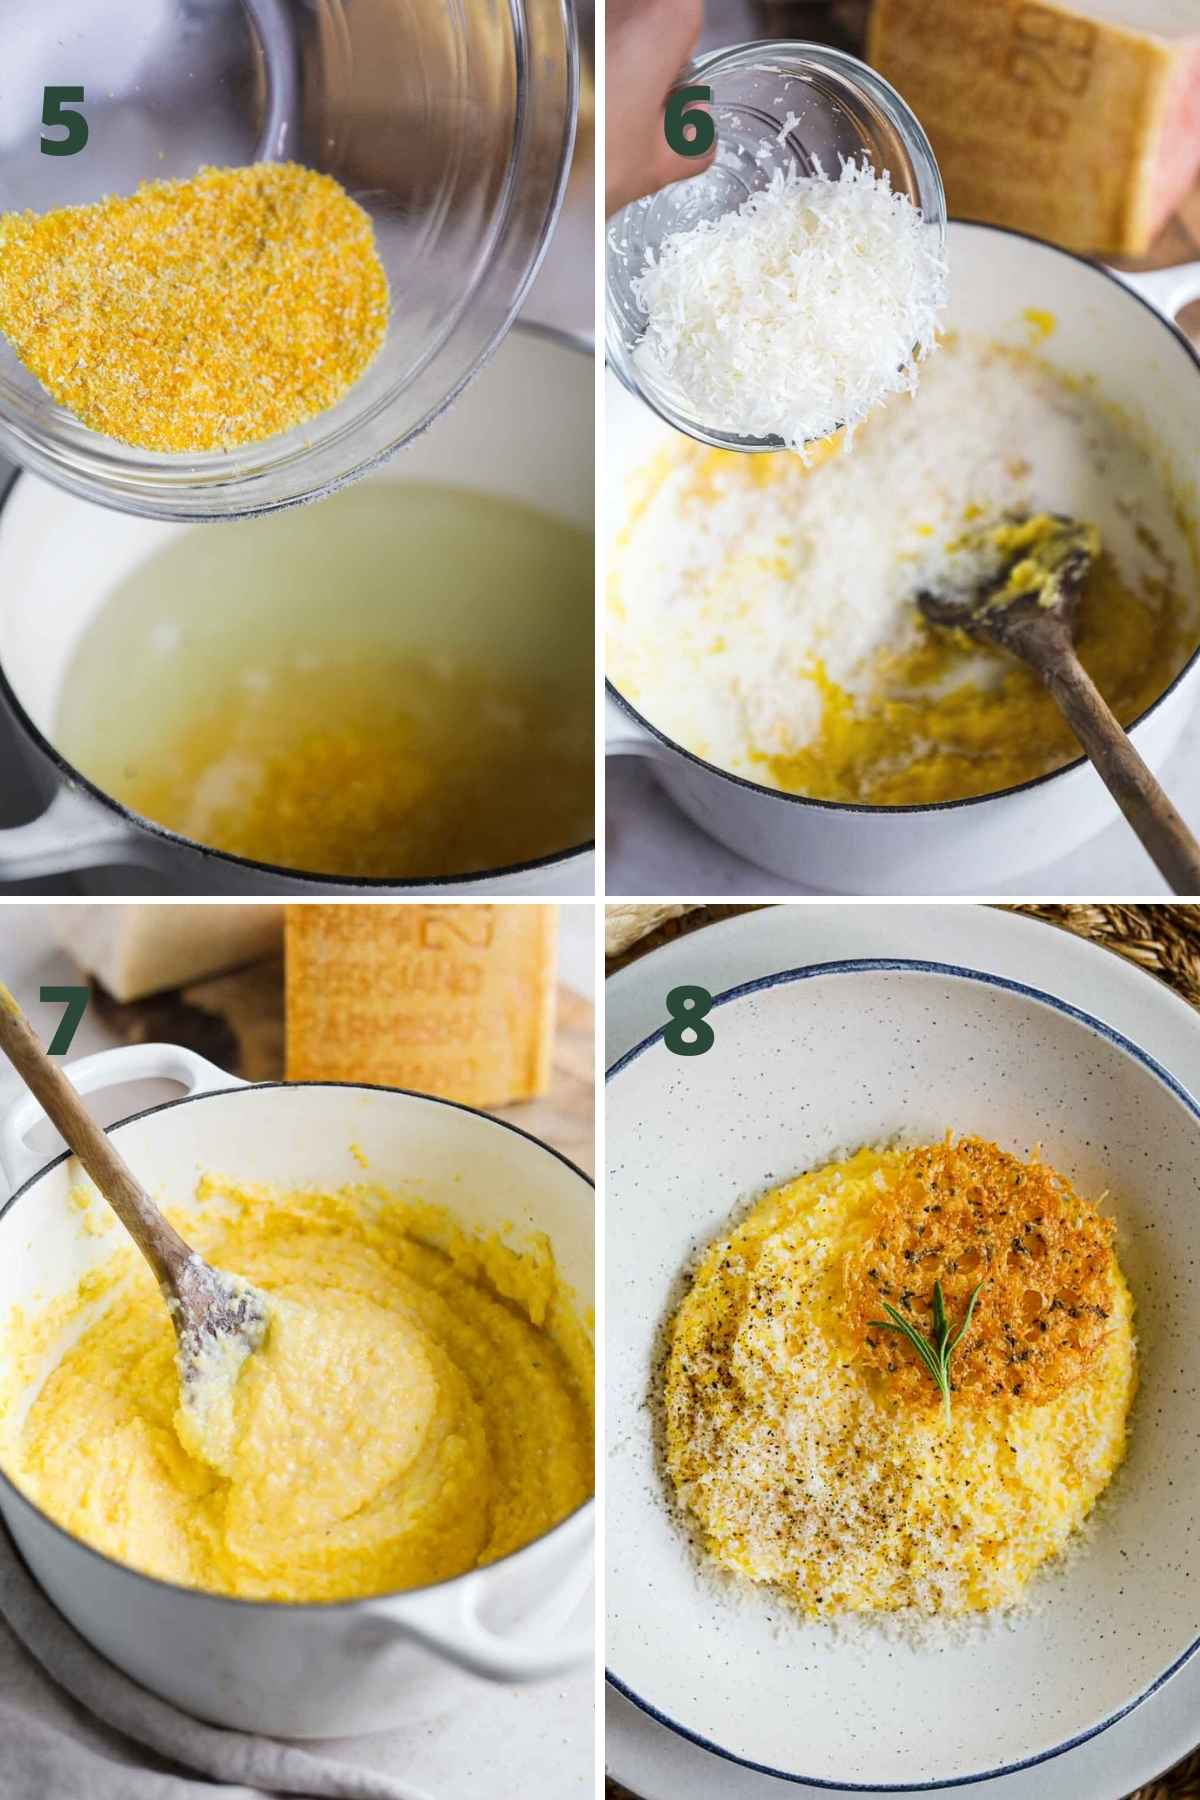 Steps to make creamy parmesan polenta with frico crisps, including adding the polenta to salted water, stirring in milk, butter, and cheese, and serving with the frico crisps.